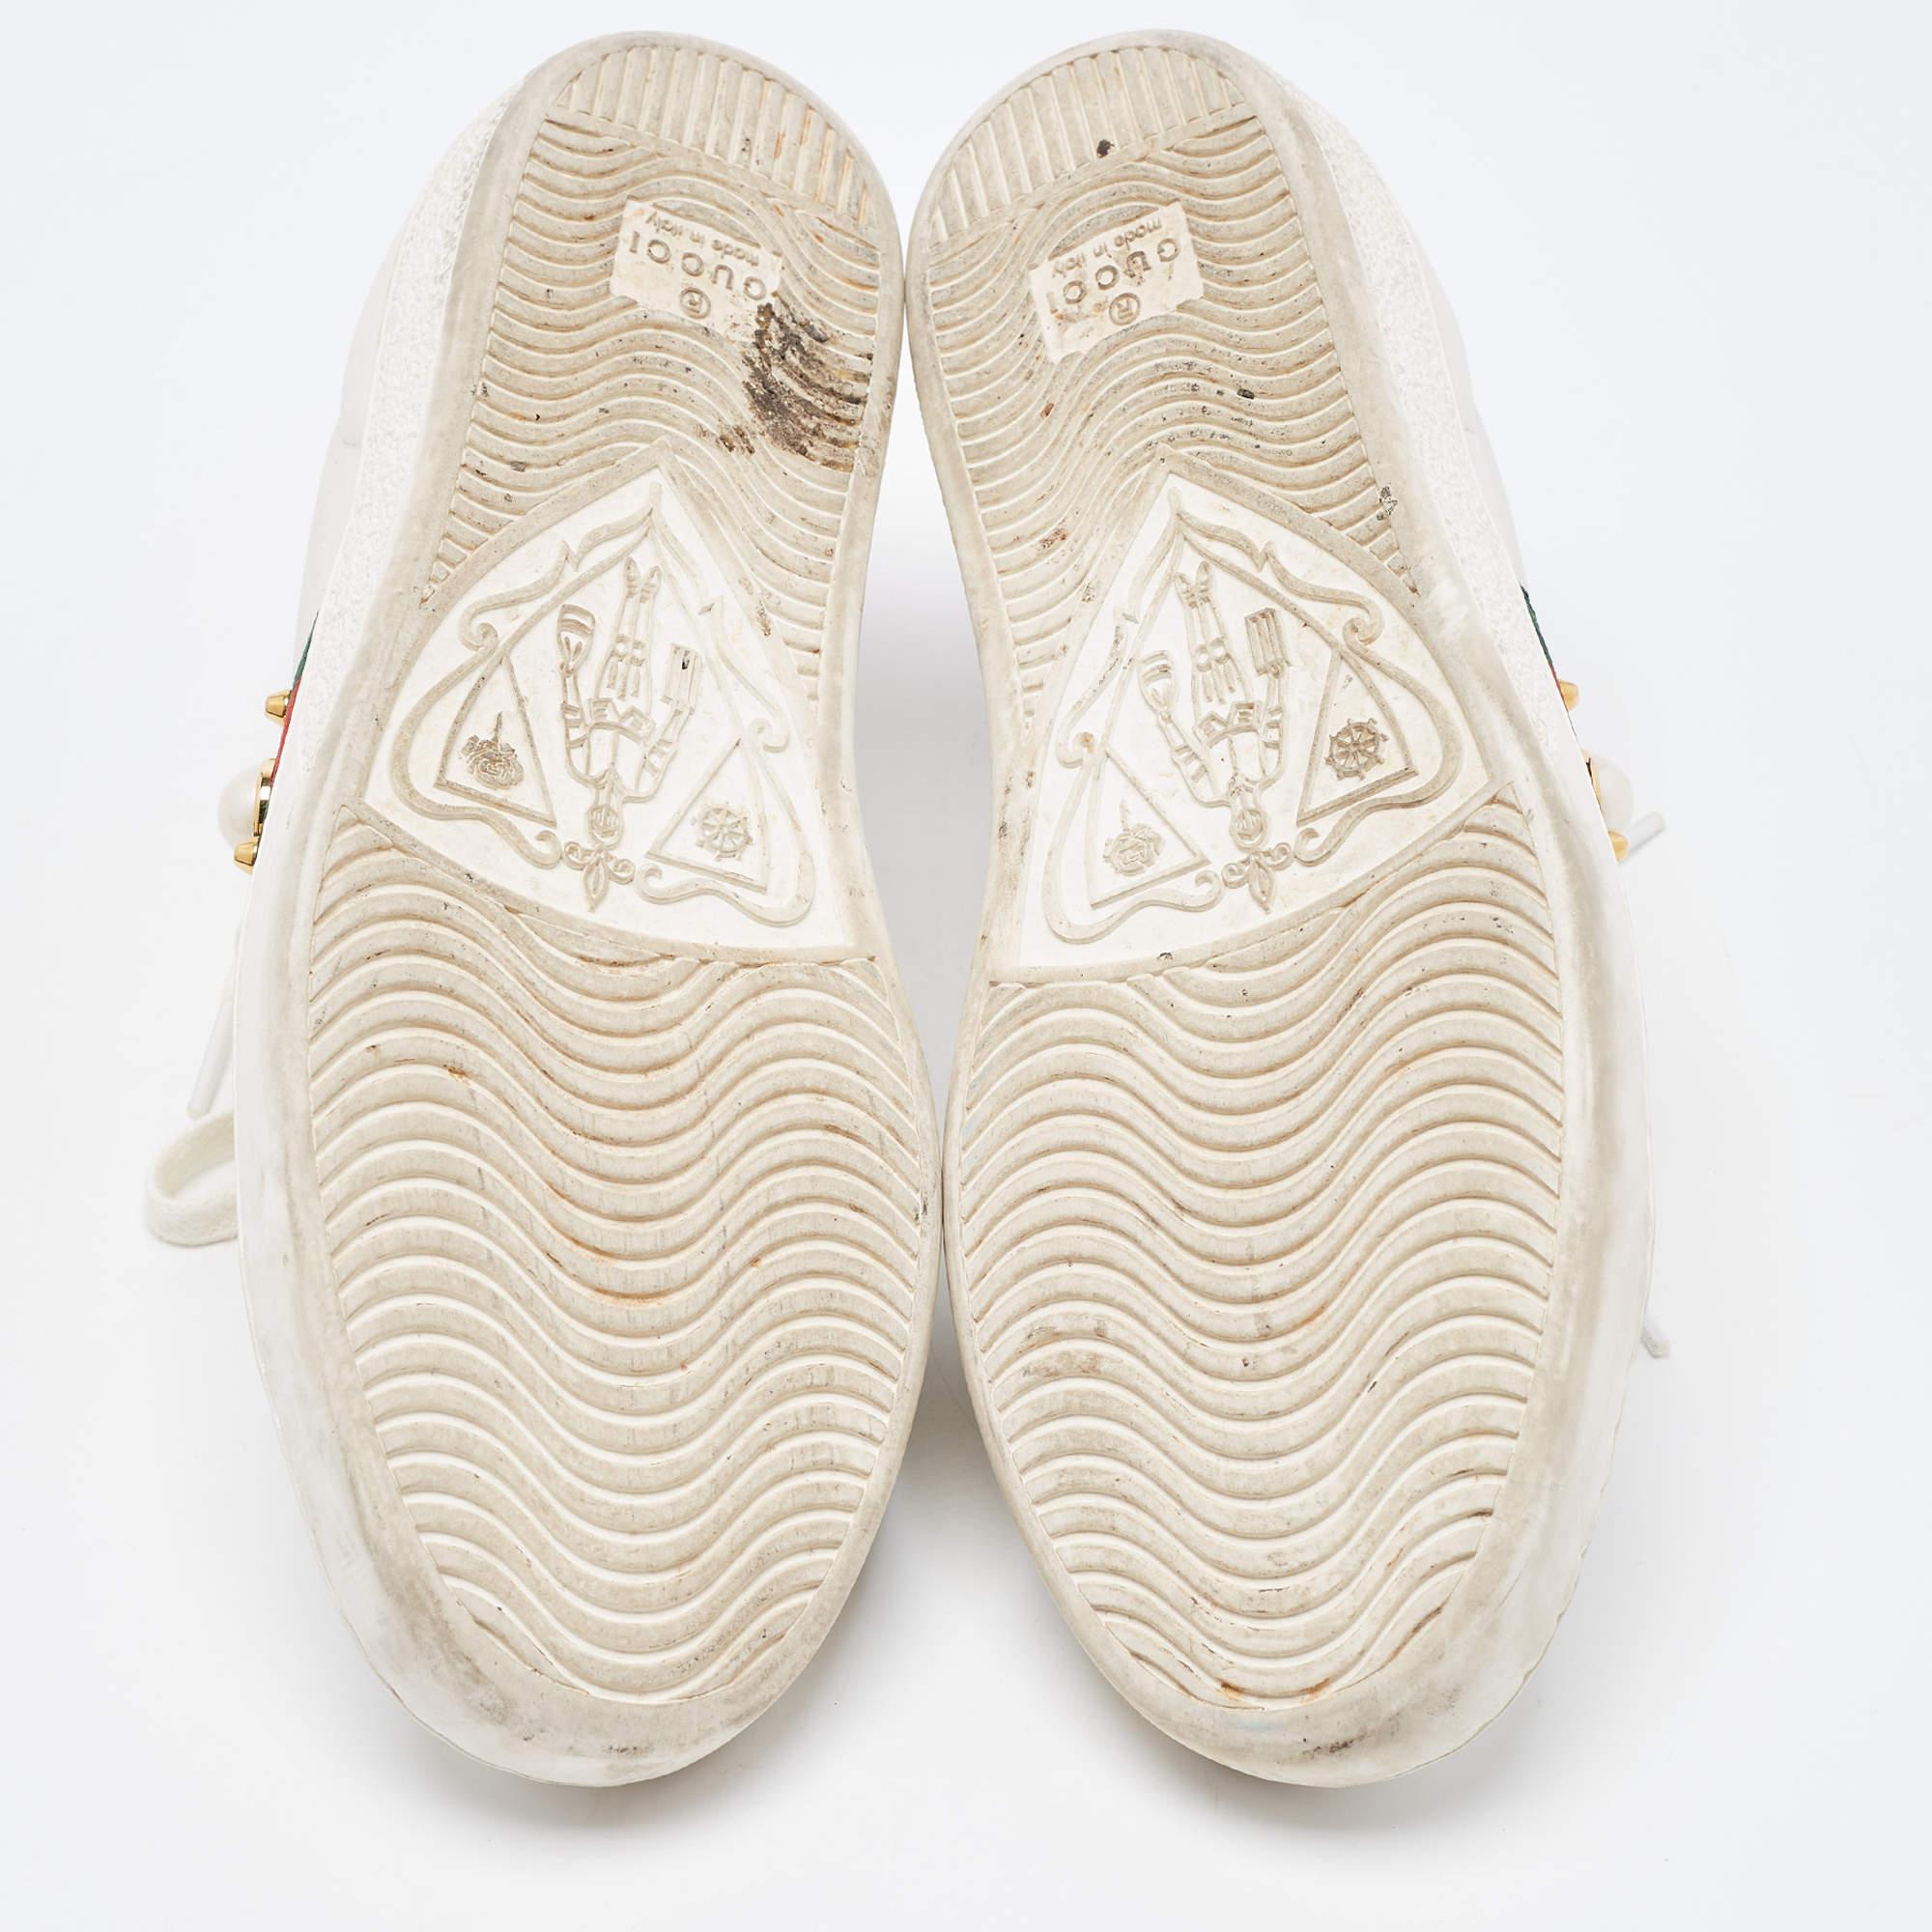 Gucci White Leather Studded and Spiked Ace Sneakers Size 36 For Sale 1